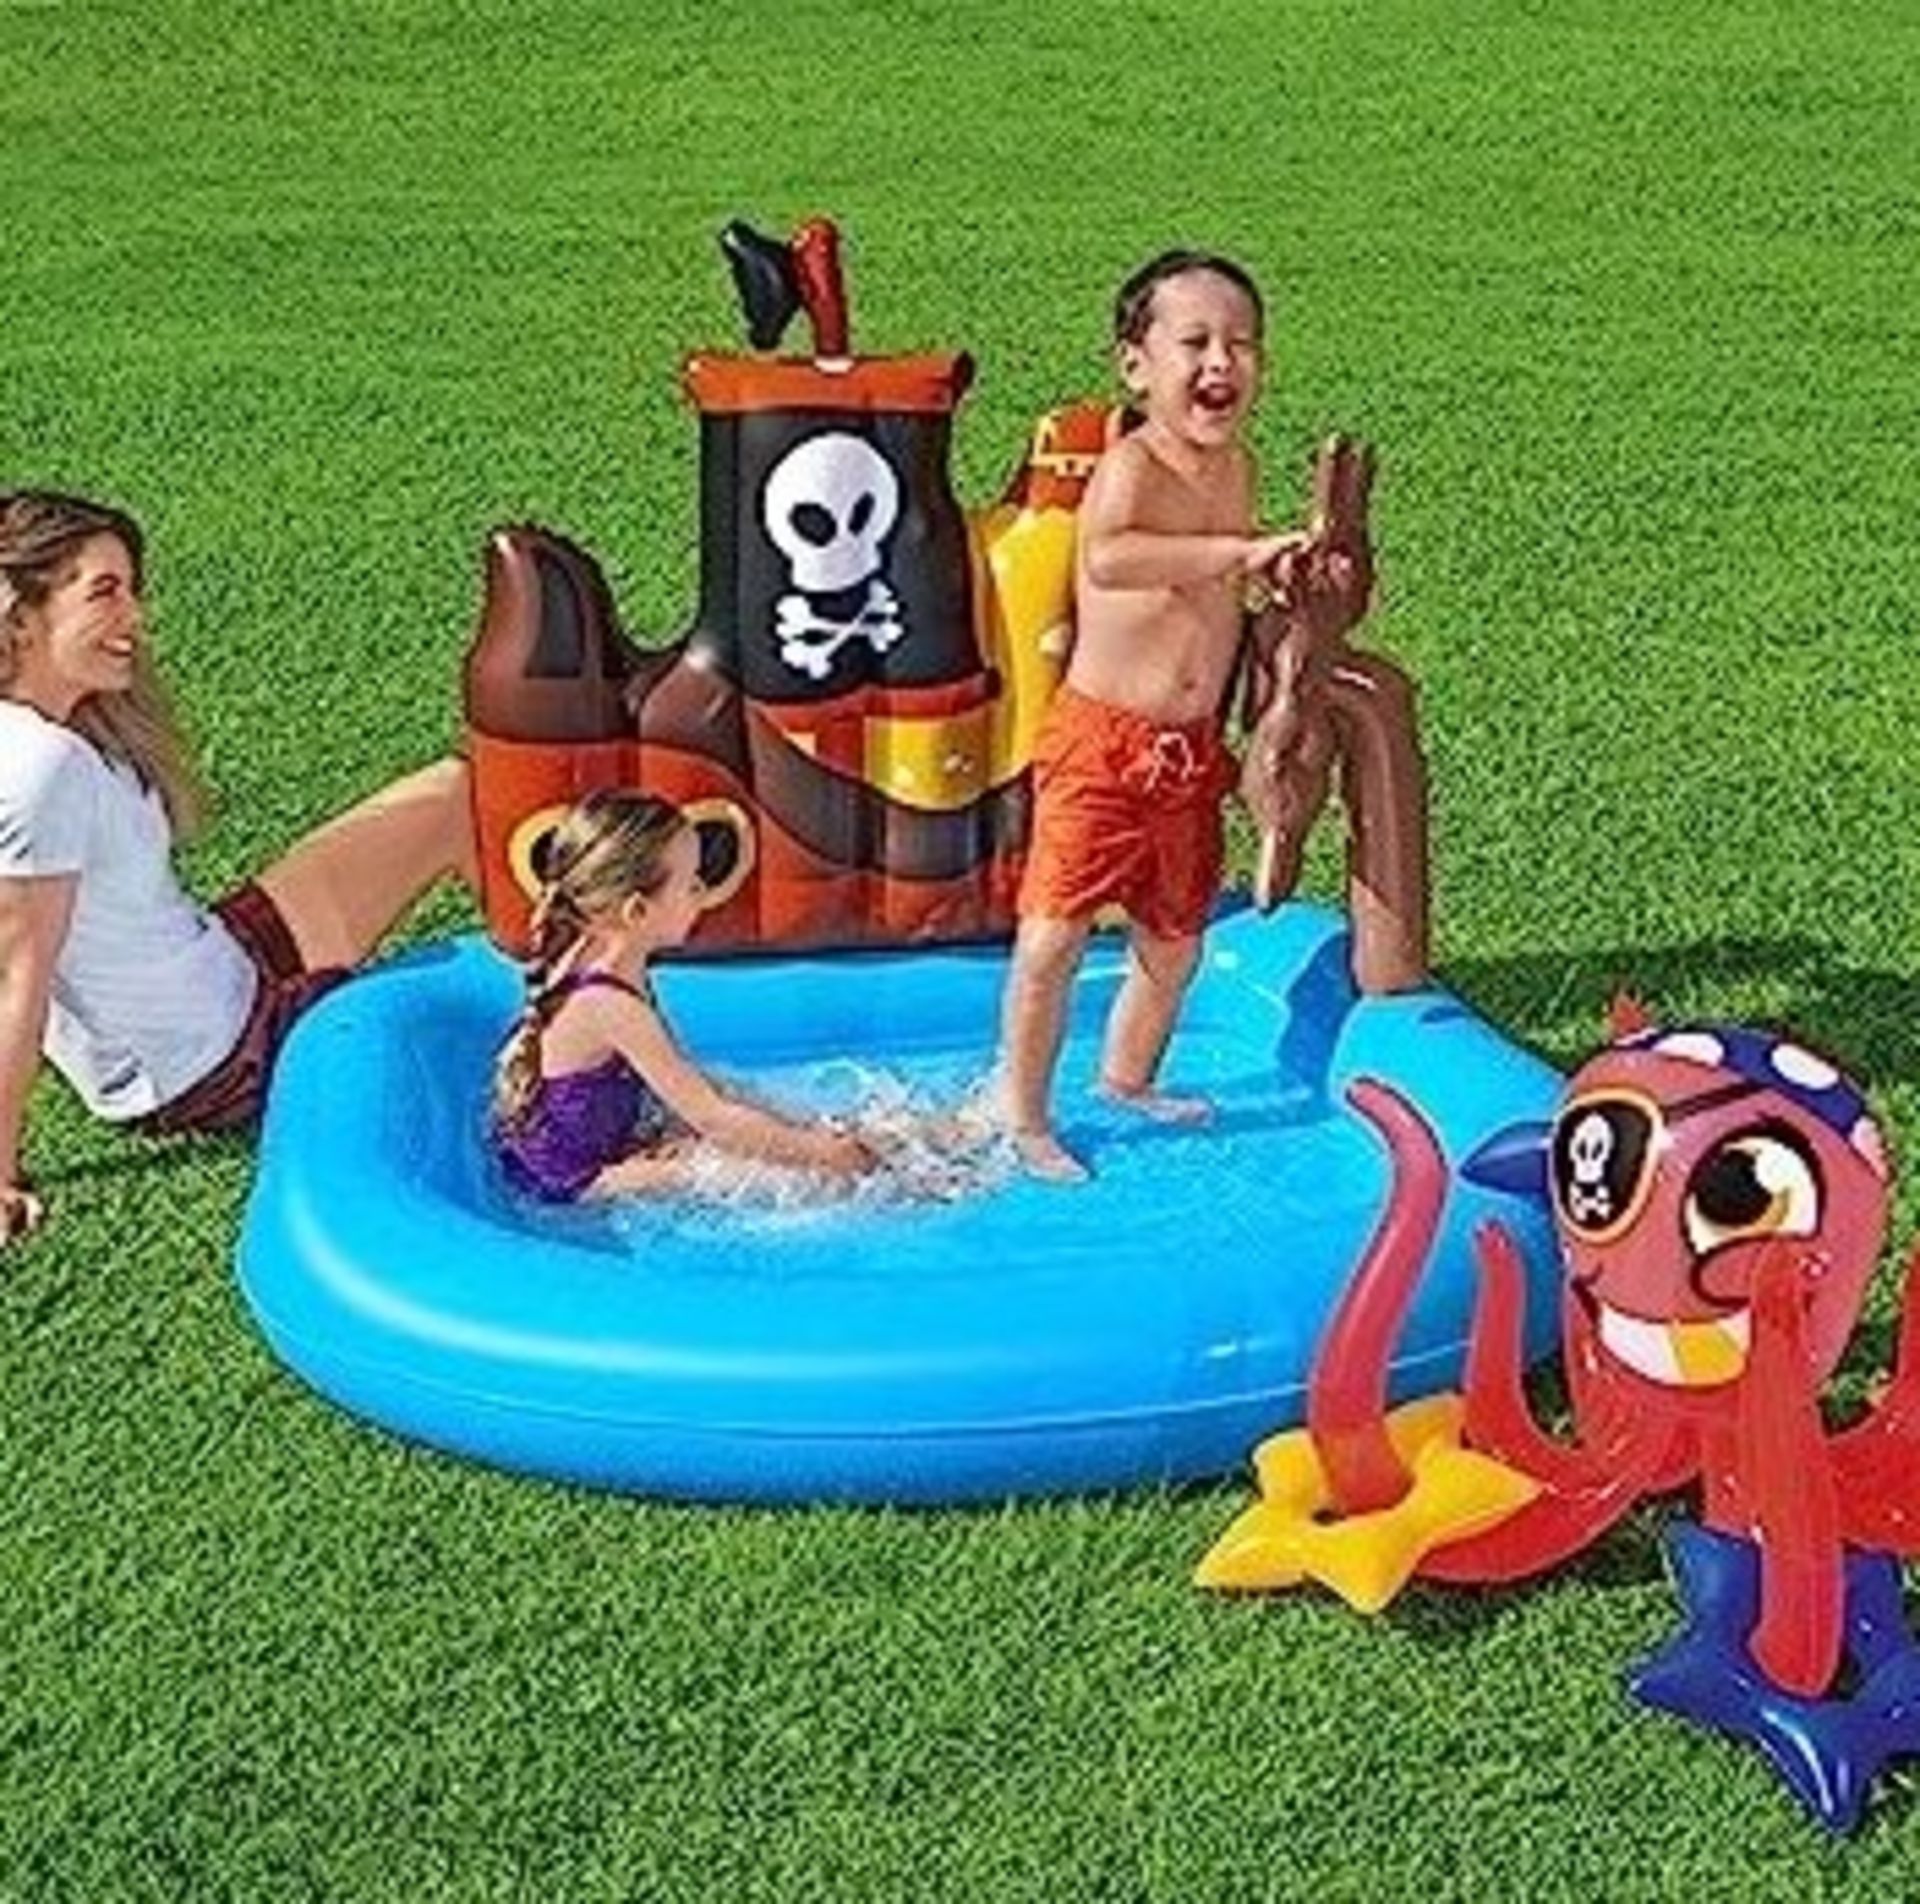 6 X BRAND NEW BESTWAY SHIPS AHOY PLAY CENTRE INFLATABLE POOLS - WITH OCTOPUS RING TOSS GAME (1.40